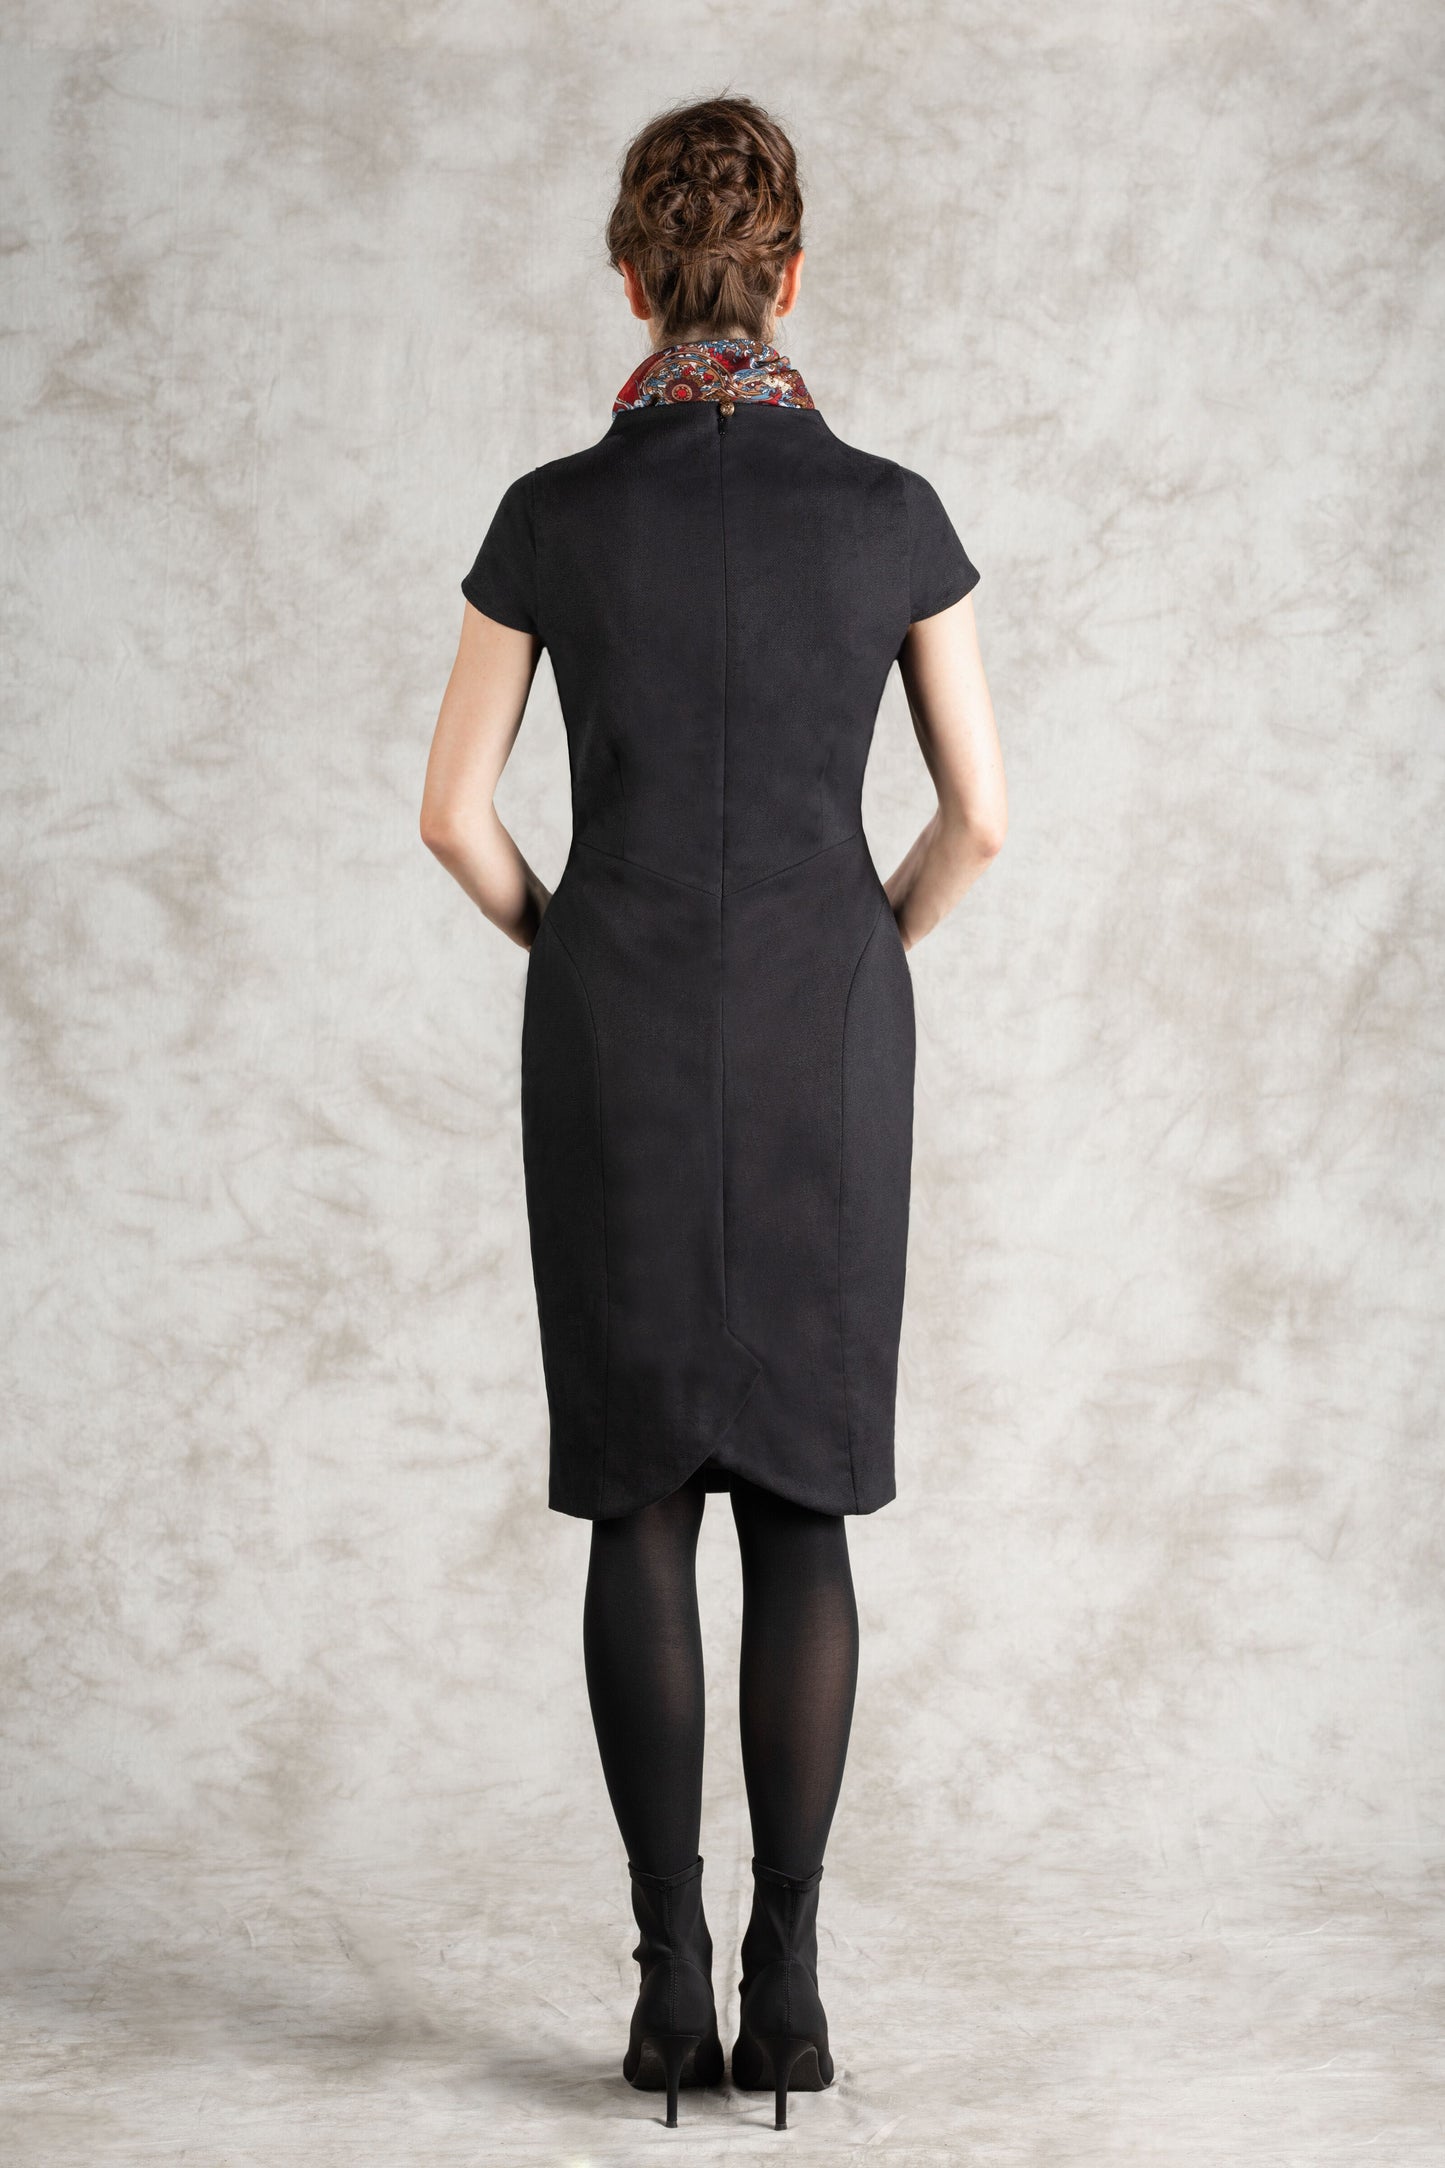 The Victoire Dress